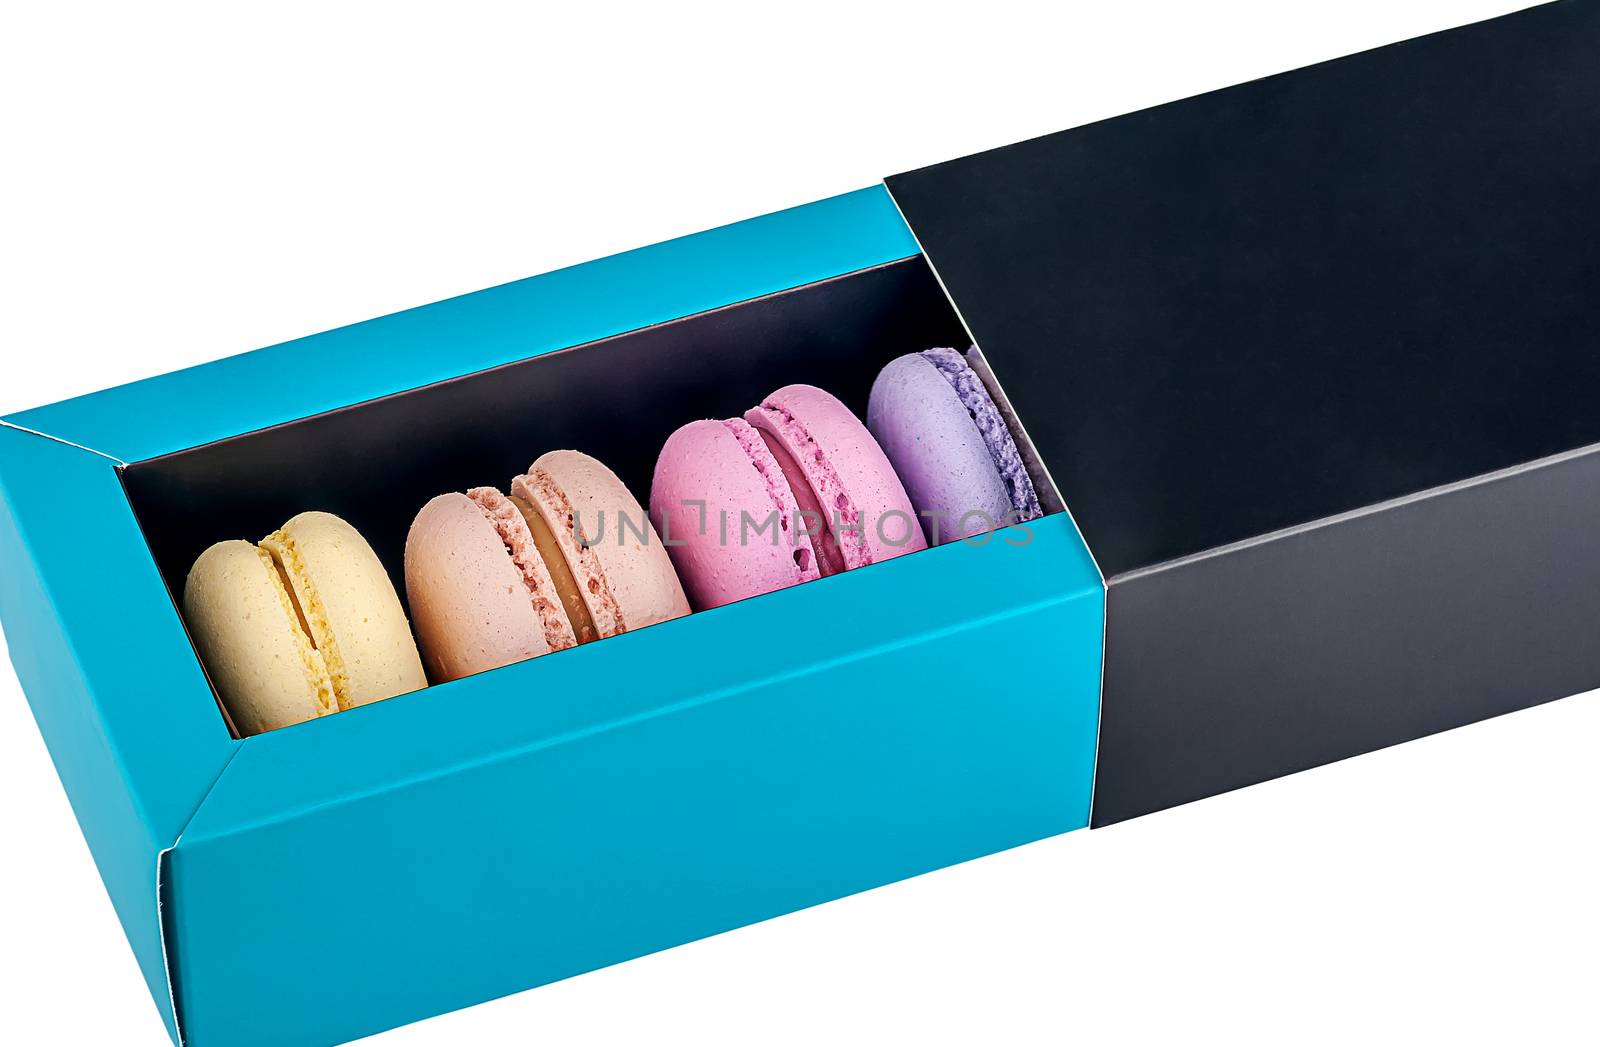 Macaroons in gift box front view by Cipariss